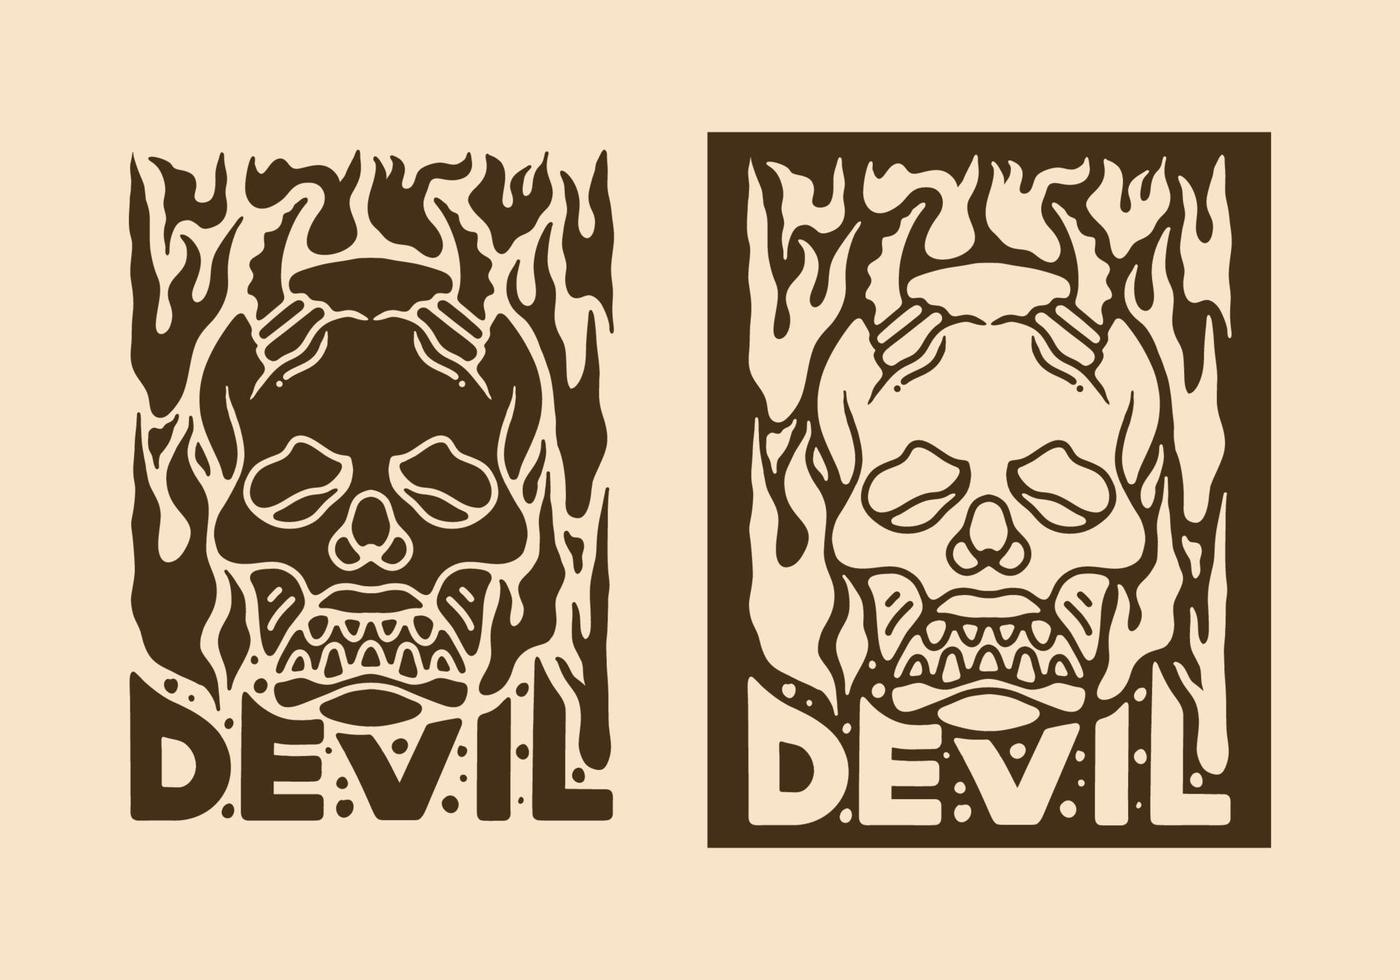 Illustration design of skull with horns and fanged teeth vector